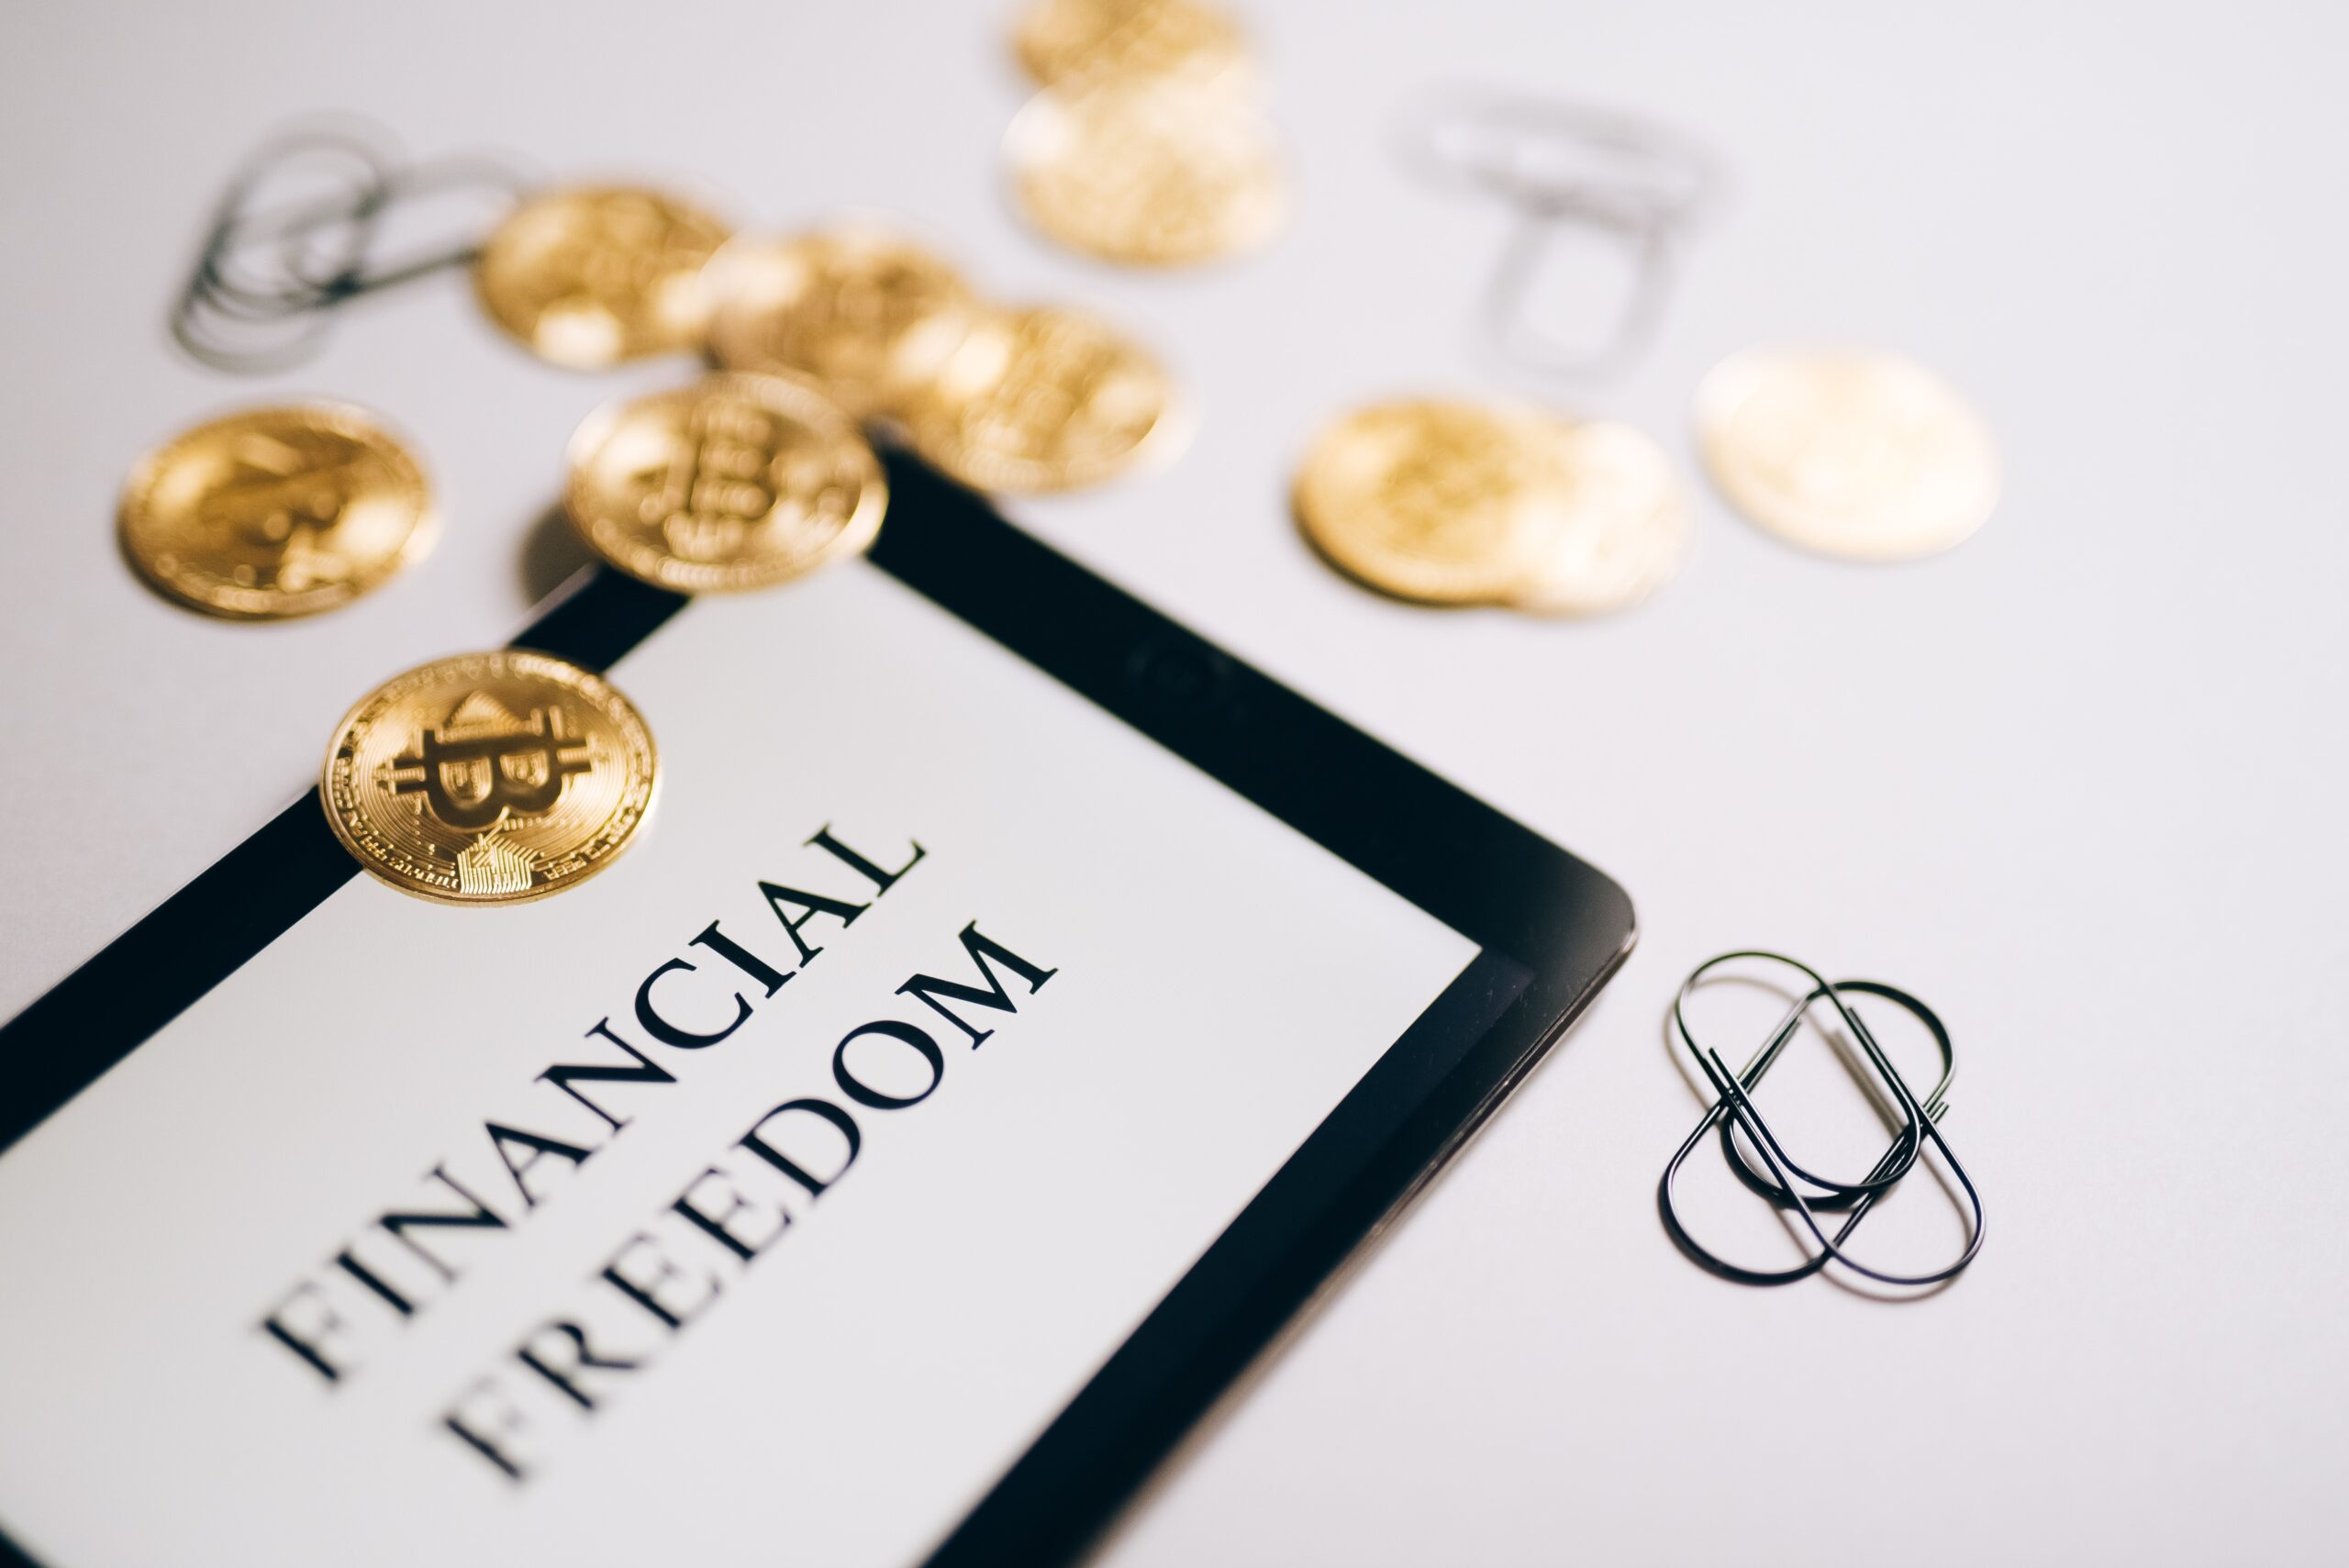 a picture showing bitcoins next to a tablet showing text that reads Financial Freedom